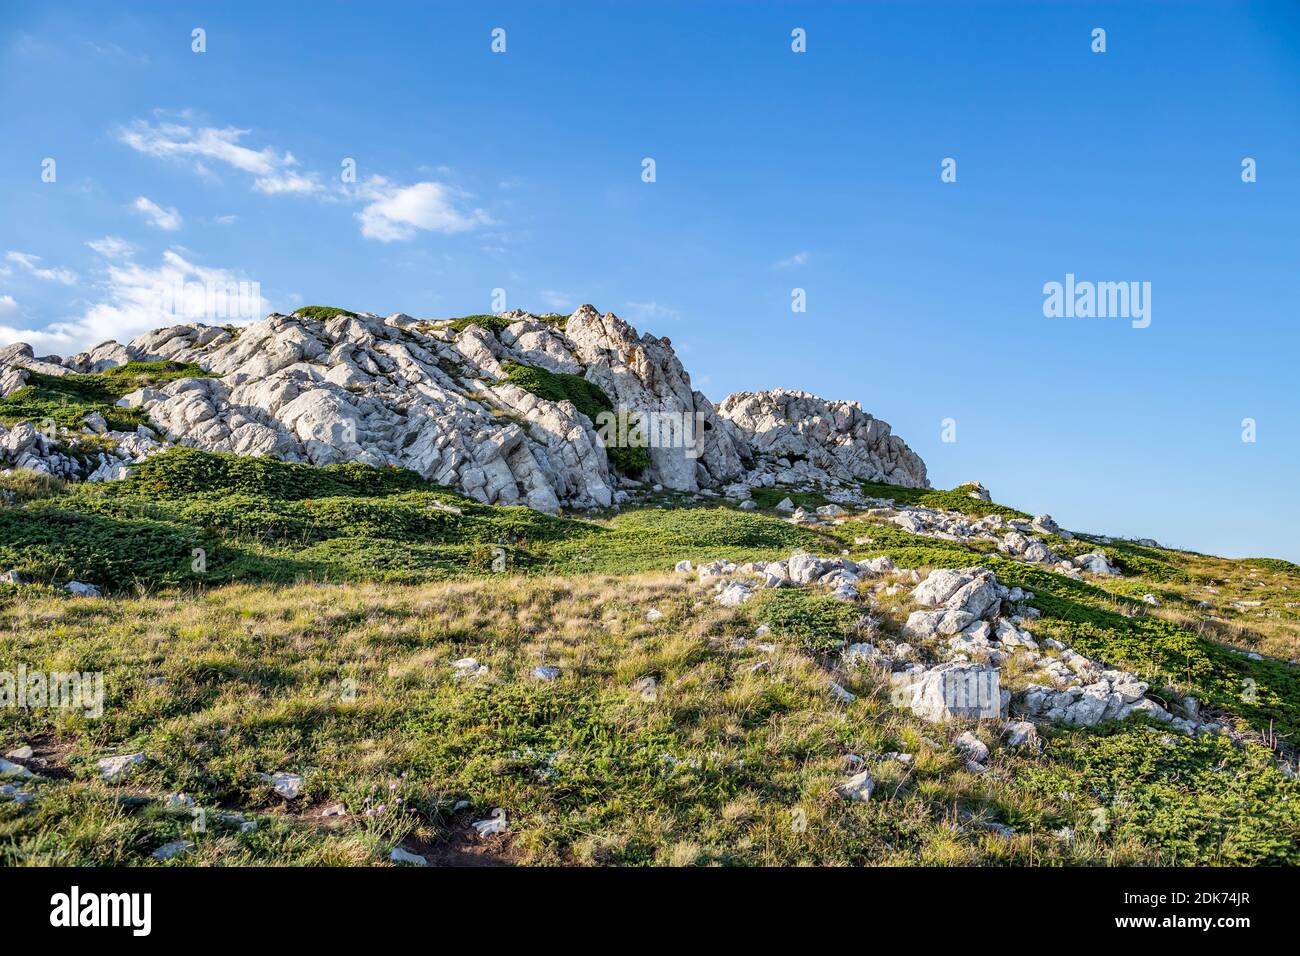 Rock Formations On Landscape Against Blue Sky Stock Photo